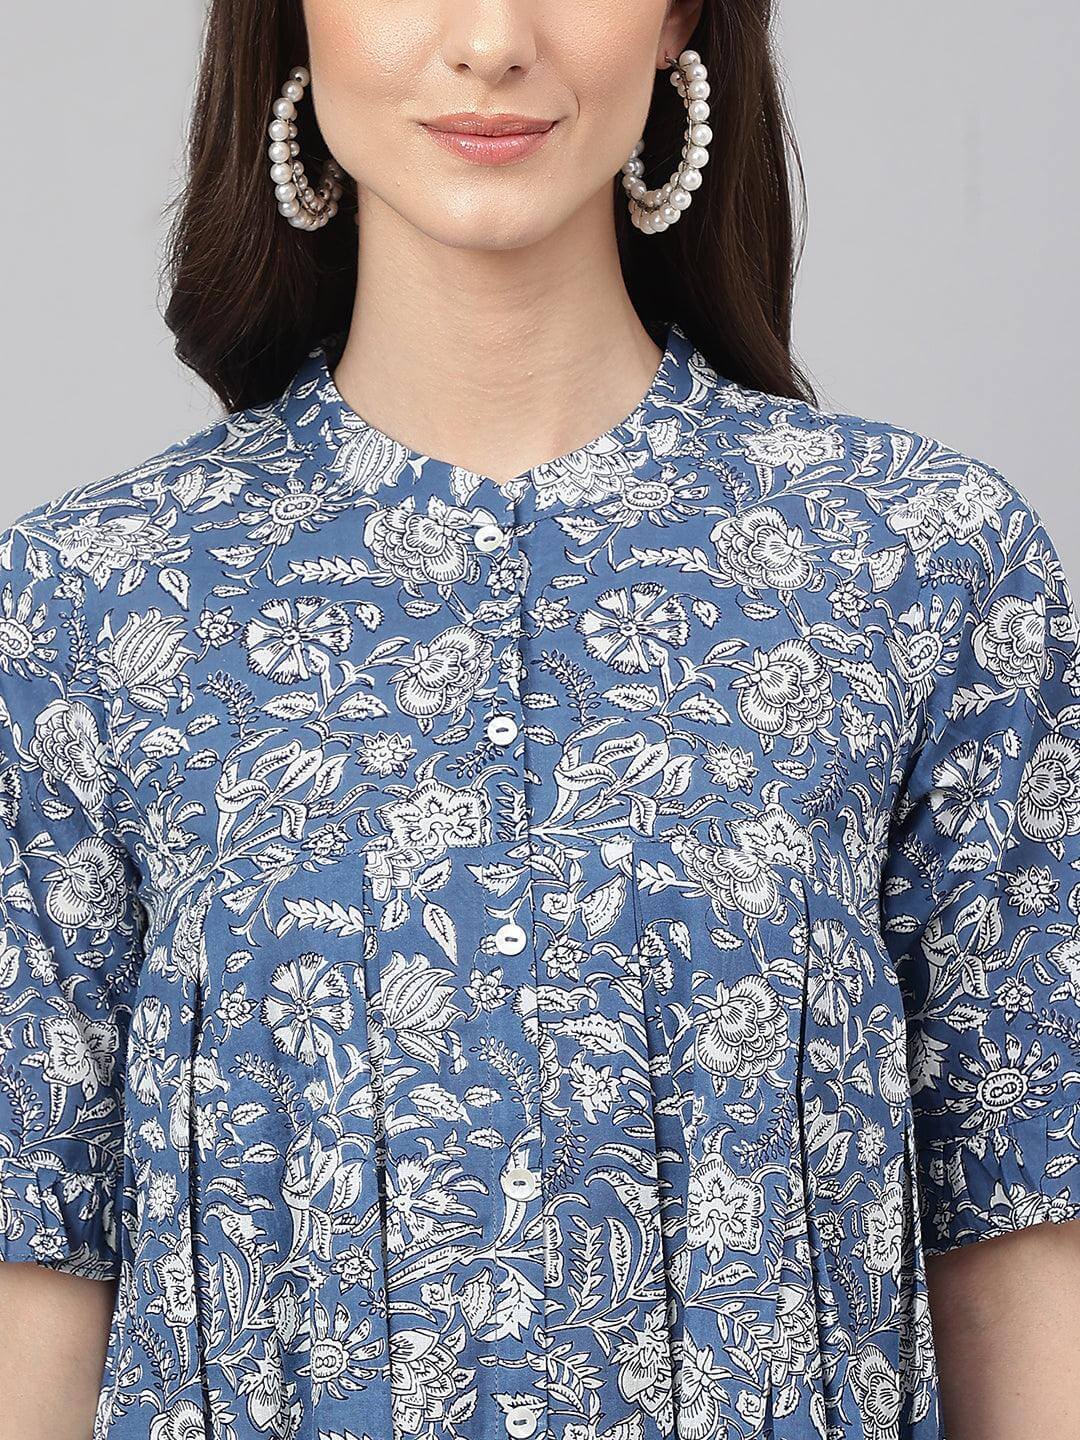 Ink Blue Cotton Floral Print Flared Top